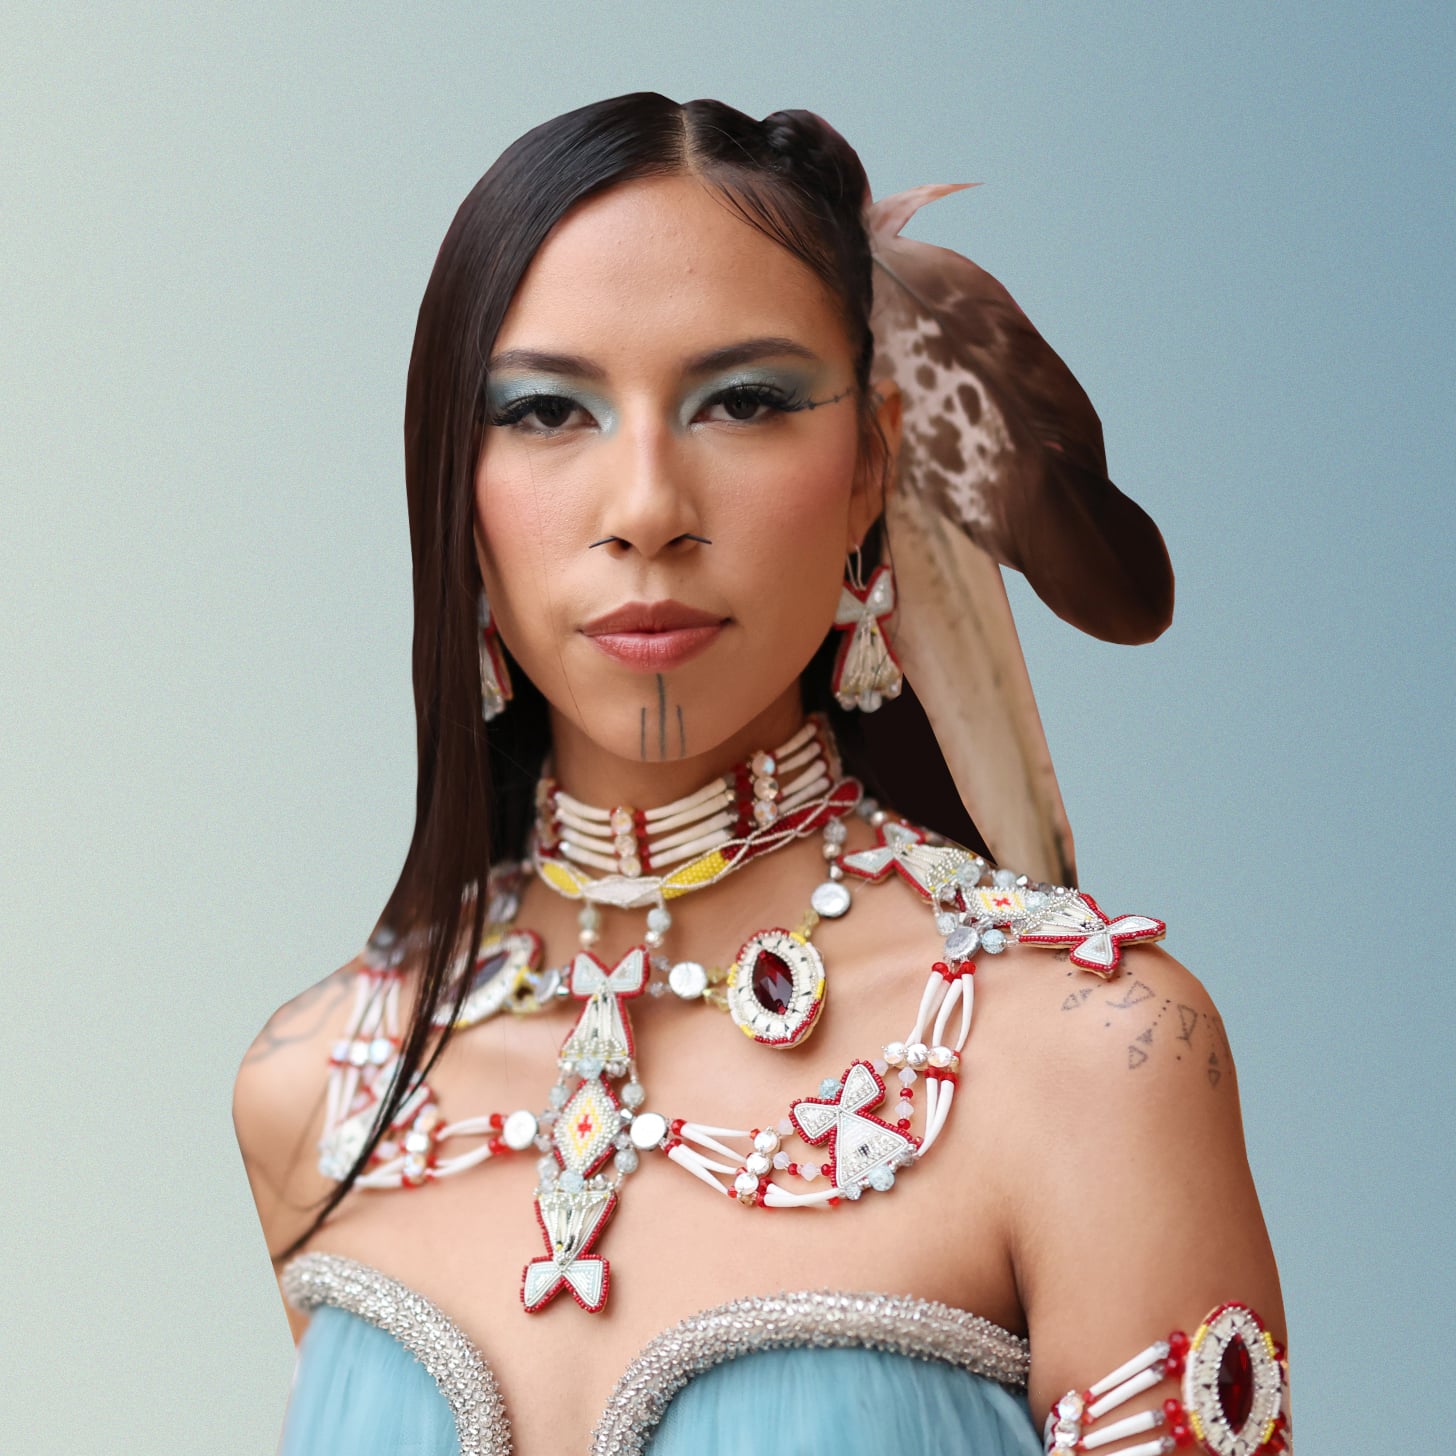 Face Tattoos In Indigenous Cultures: Meaning And History | Popsugar Beauty